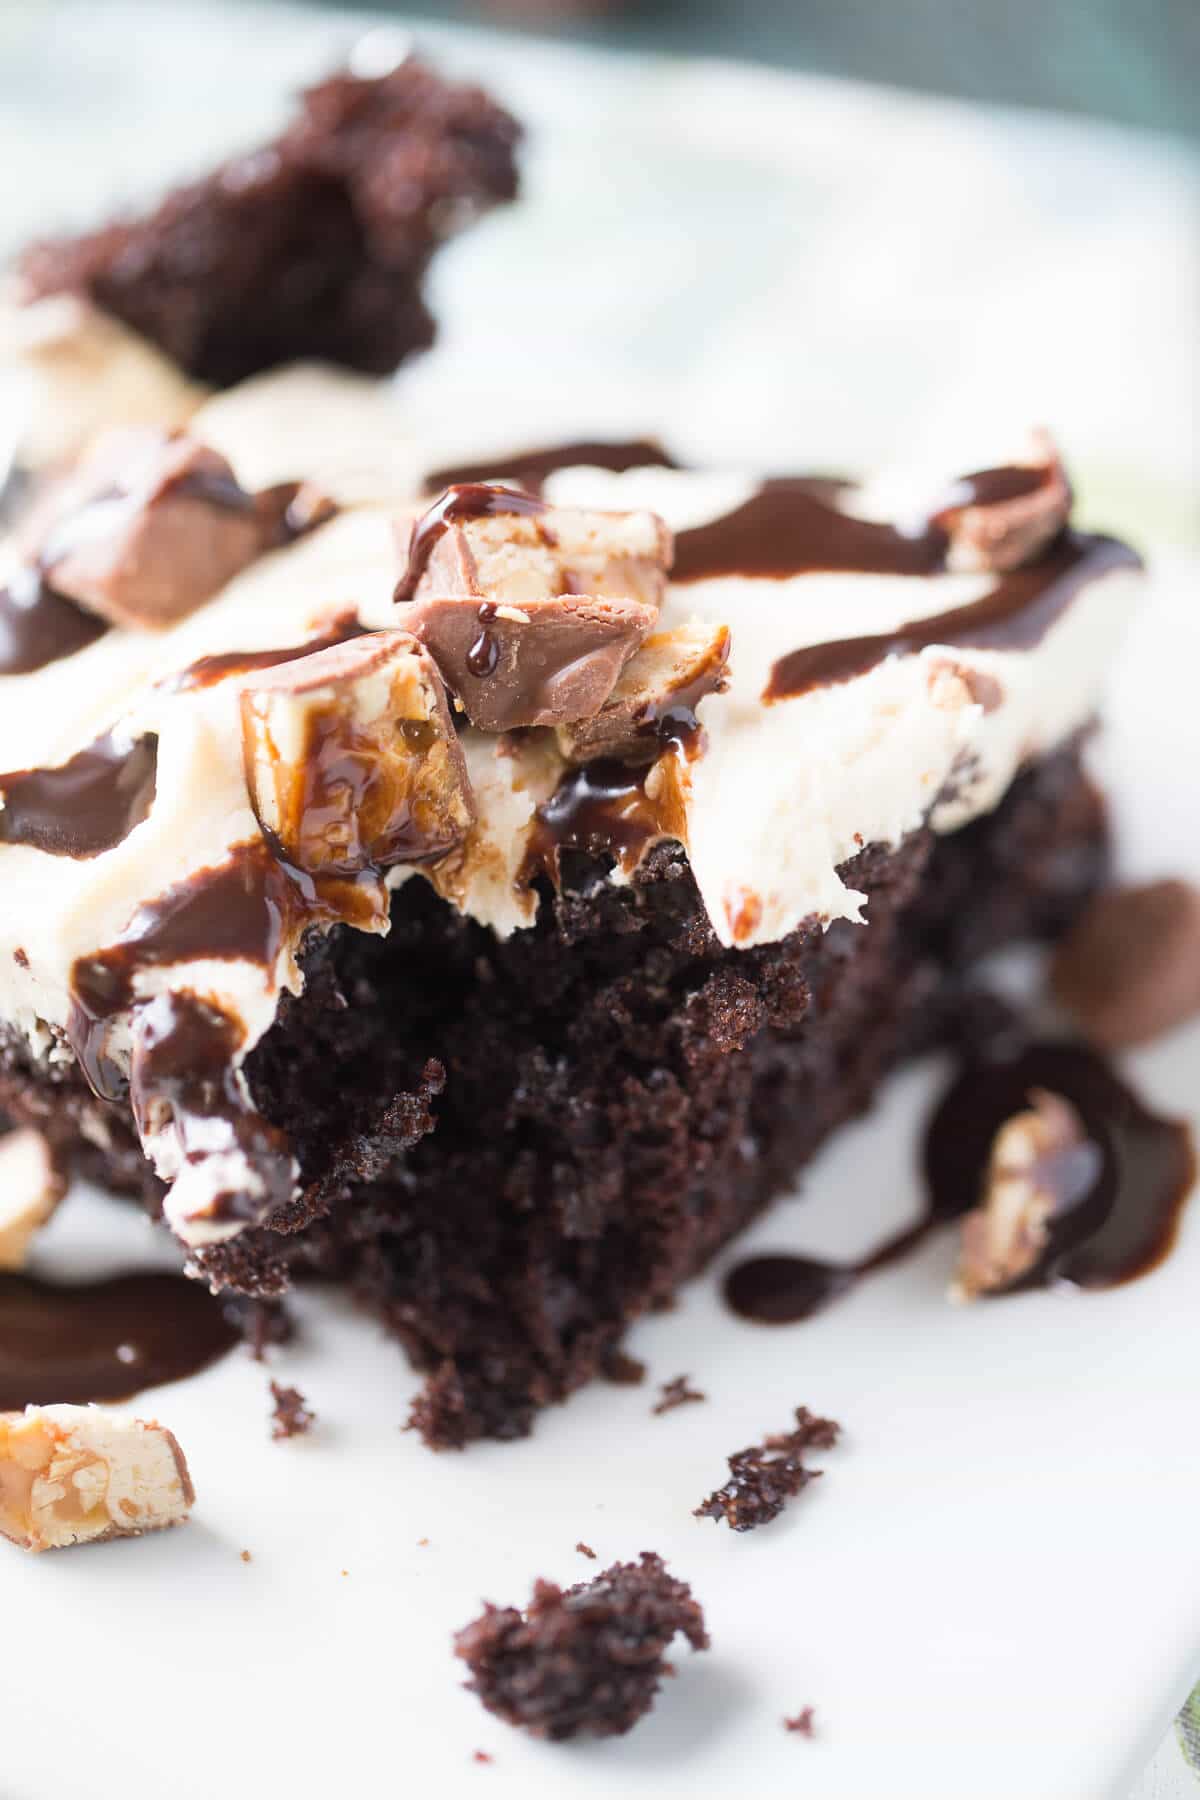 Who could resist a Snickers Poke Cake? This rich tasting dessert is irresistible!